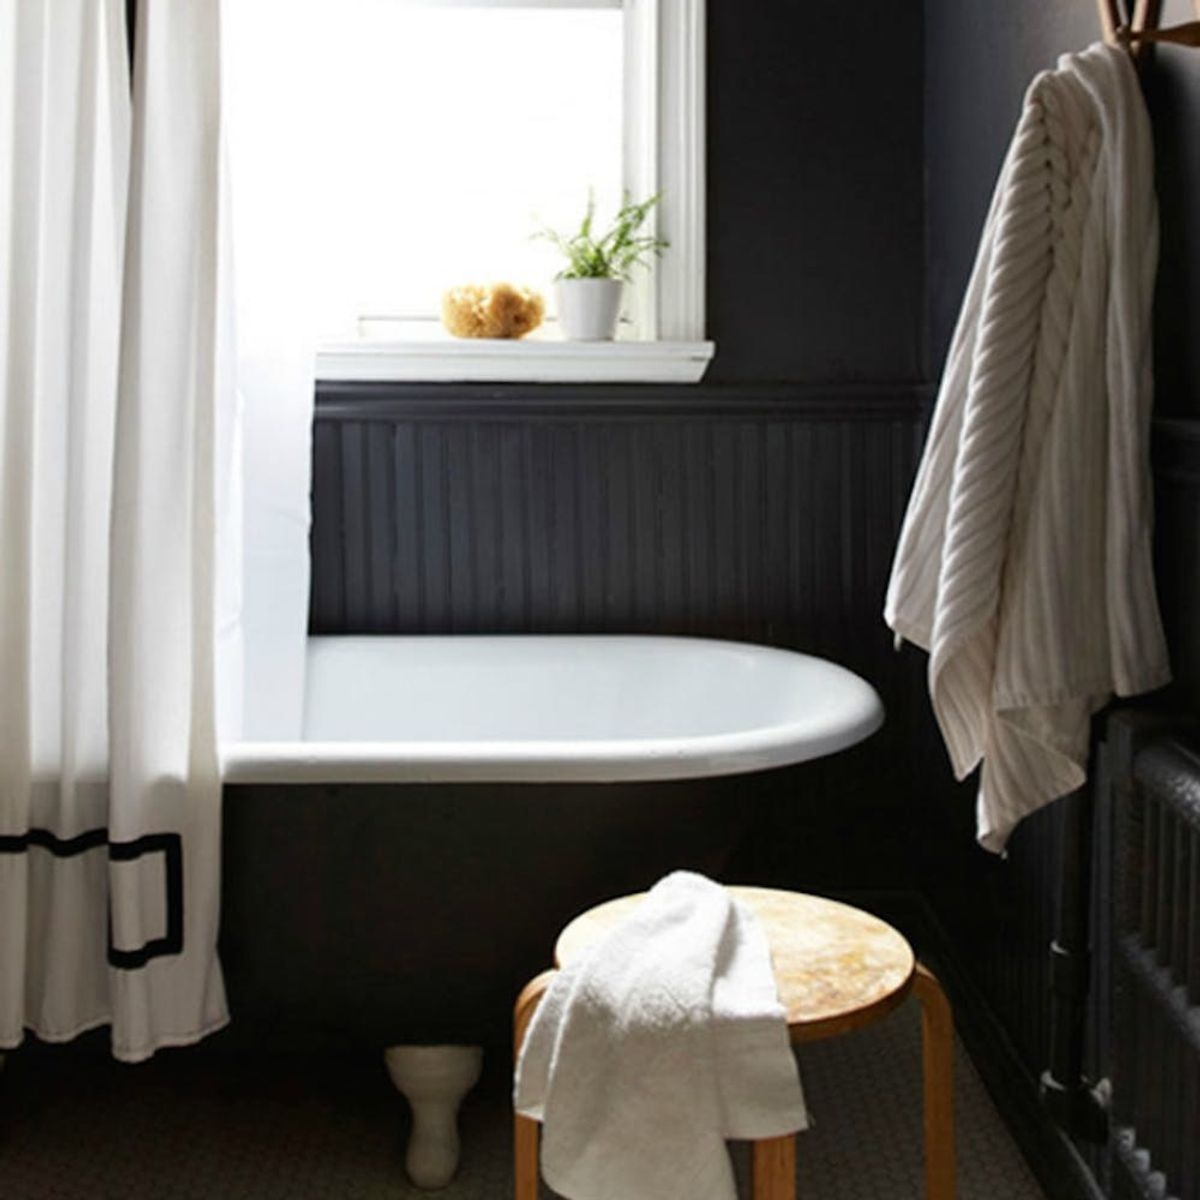 This Bathroom Cleaning Hack Will Make Your Weekend Chores a Breeze